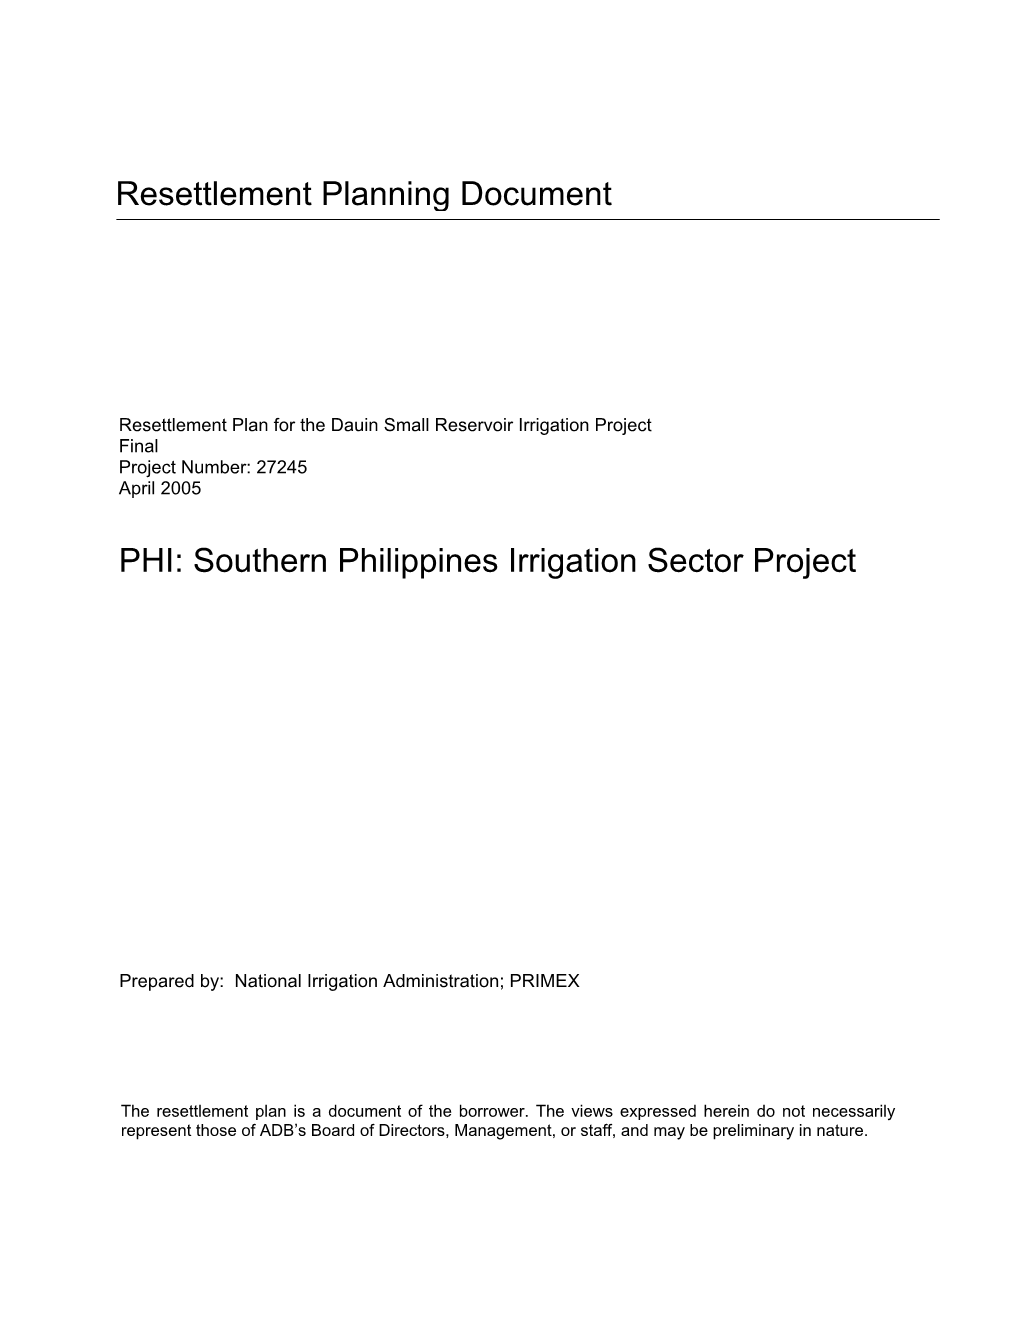 Southern Philippines Irrigation Sector Project